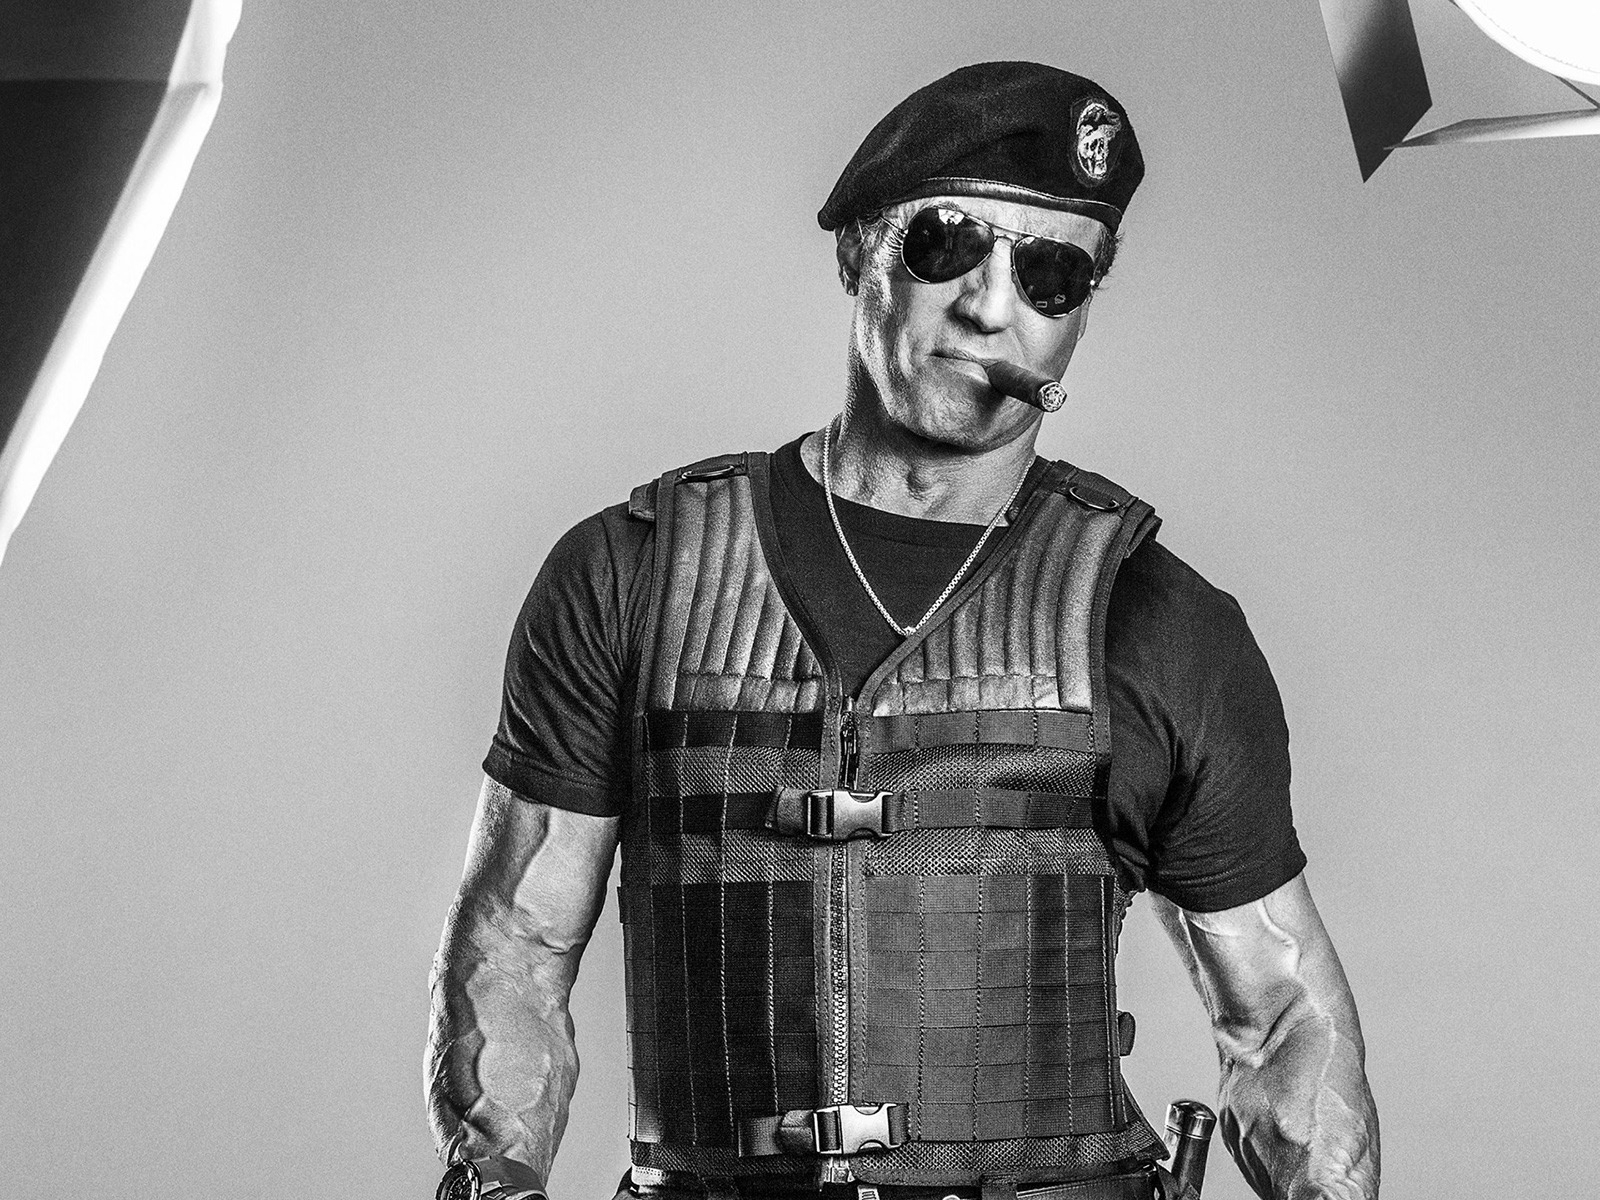 Sylvester Stallone The Expendables 3 for 1600 x 1200 resolution